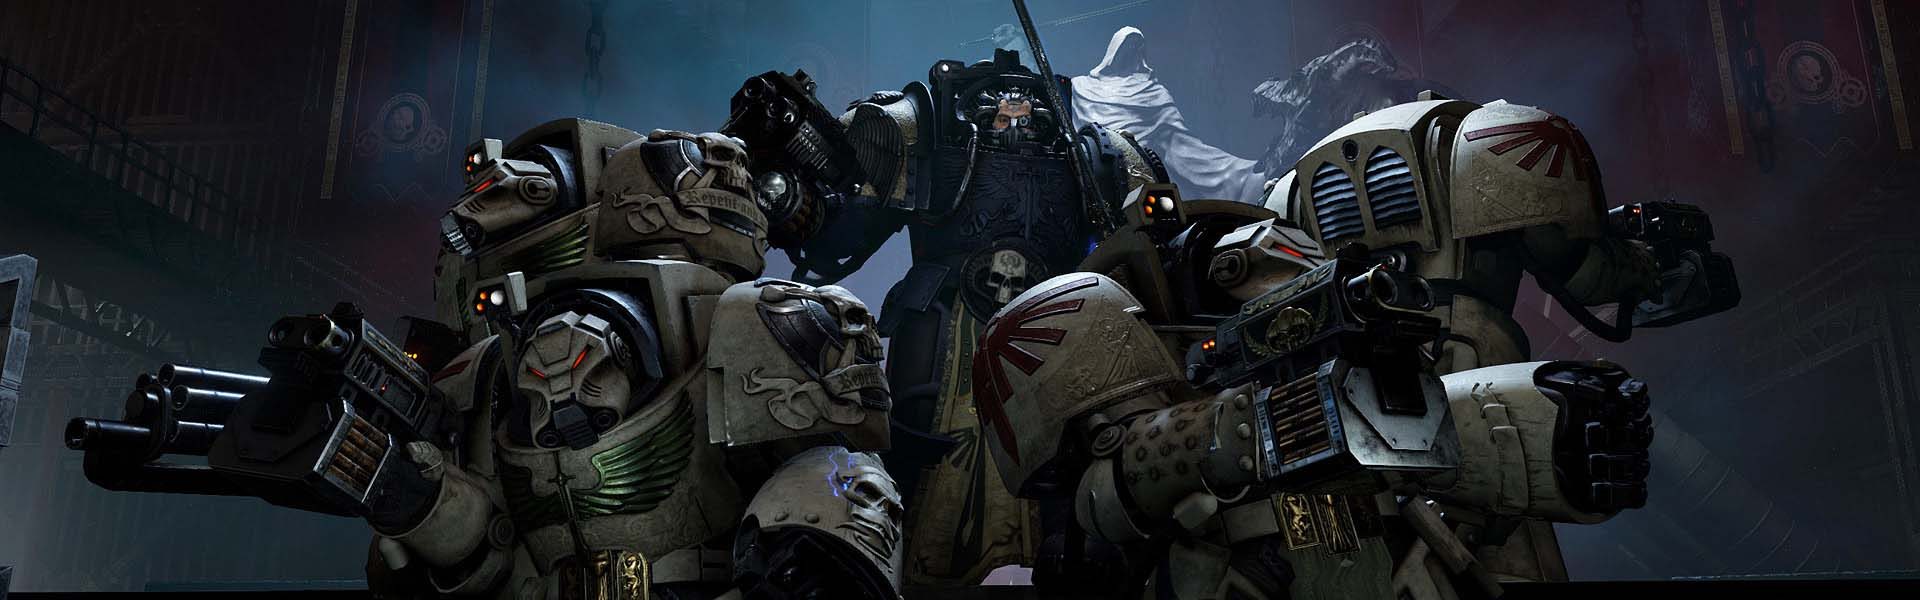 free download space hulk deathwing ps5